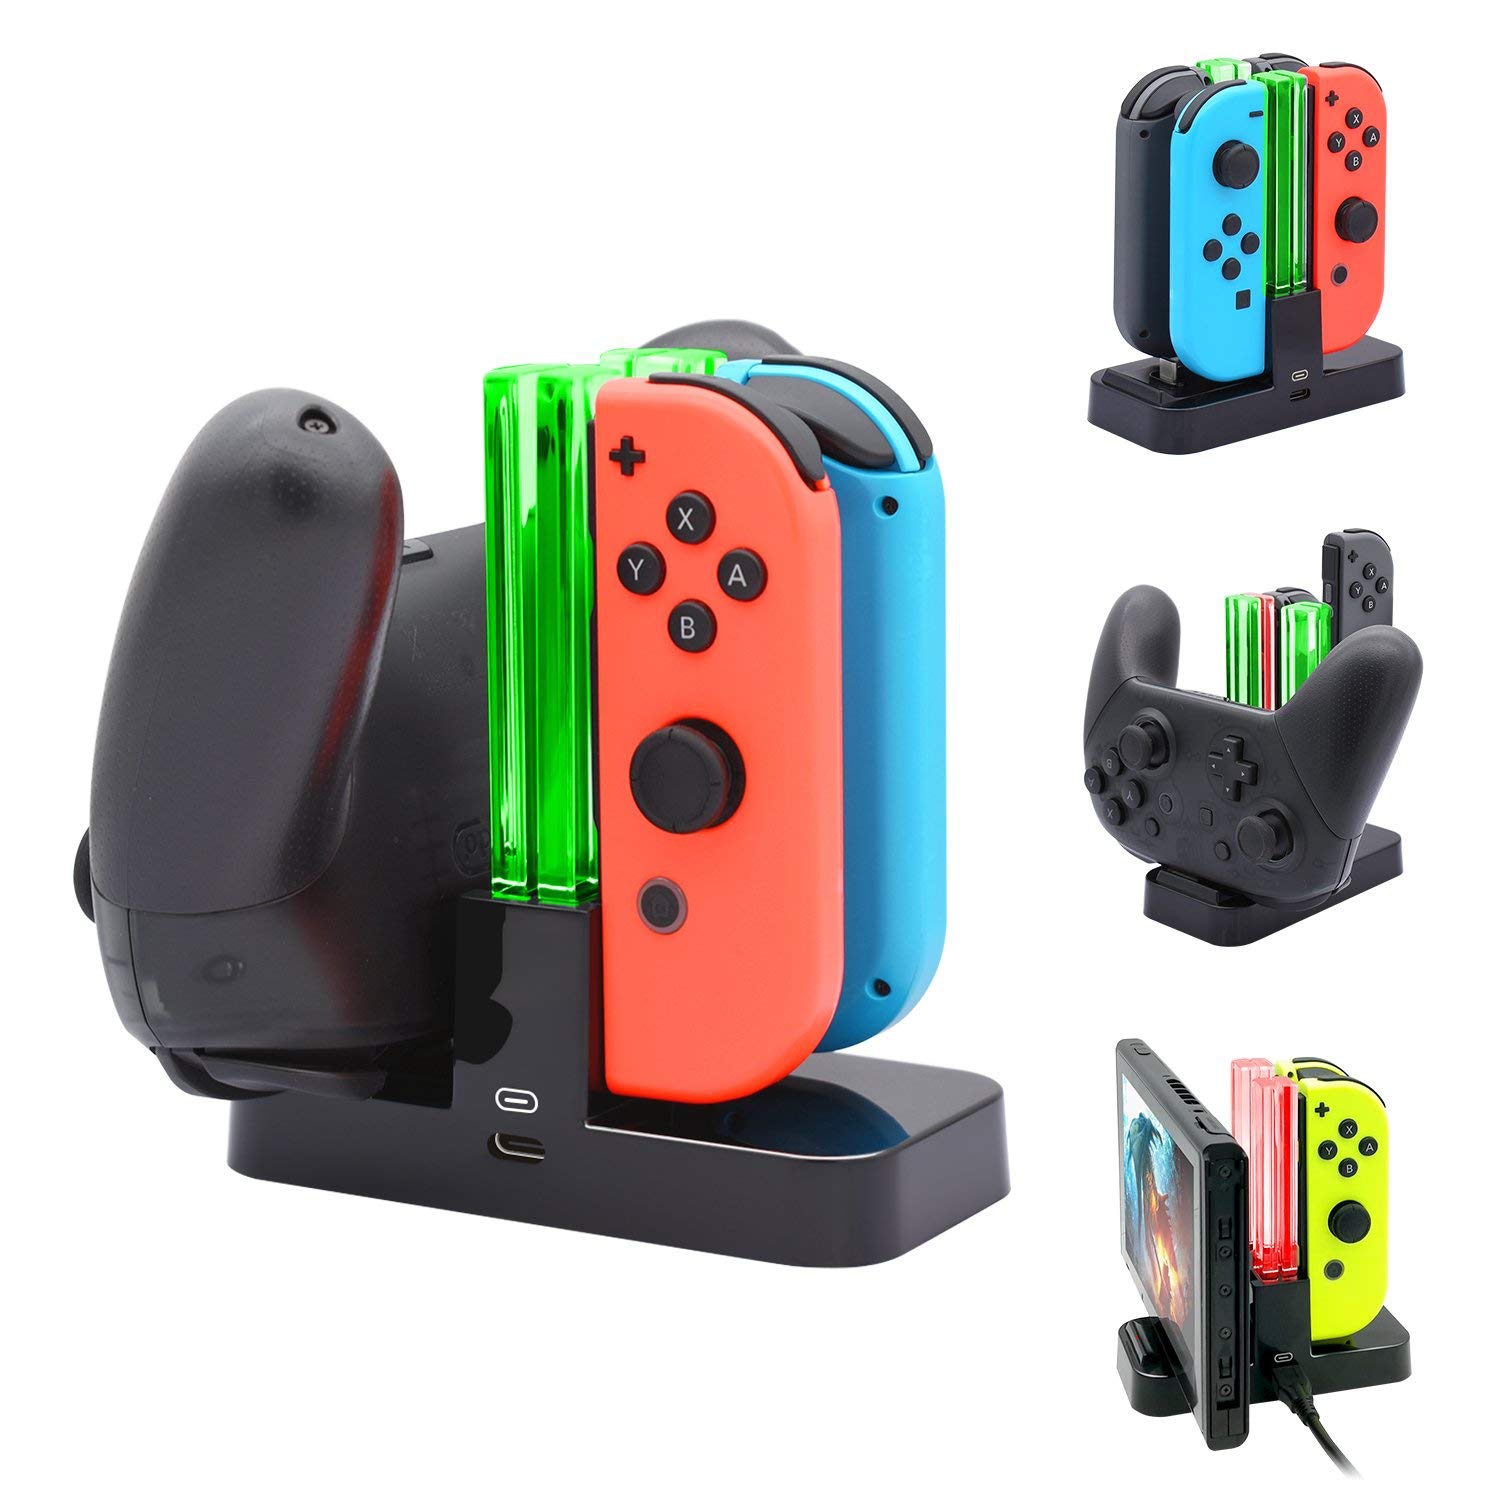 2022 Enhanced Fast Charging Dock for Pro Controller, Joy-Con & Nintendo Switch with Charging Indicator with USB Type C Charging Cable